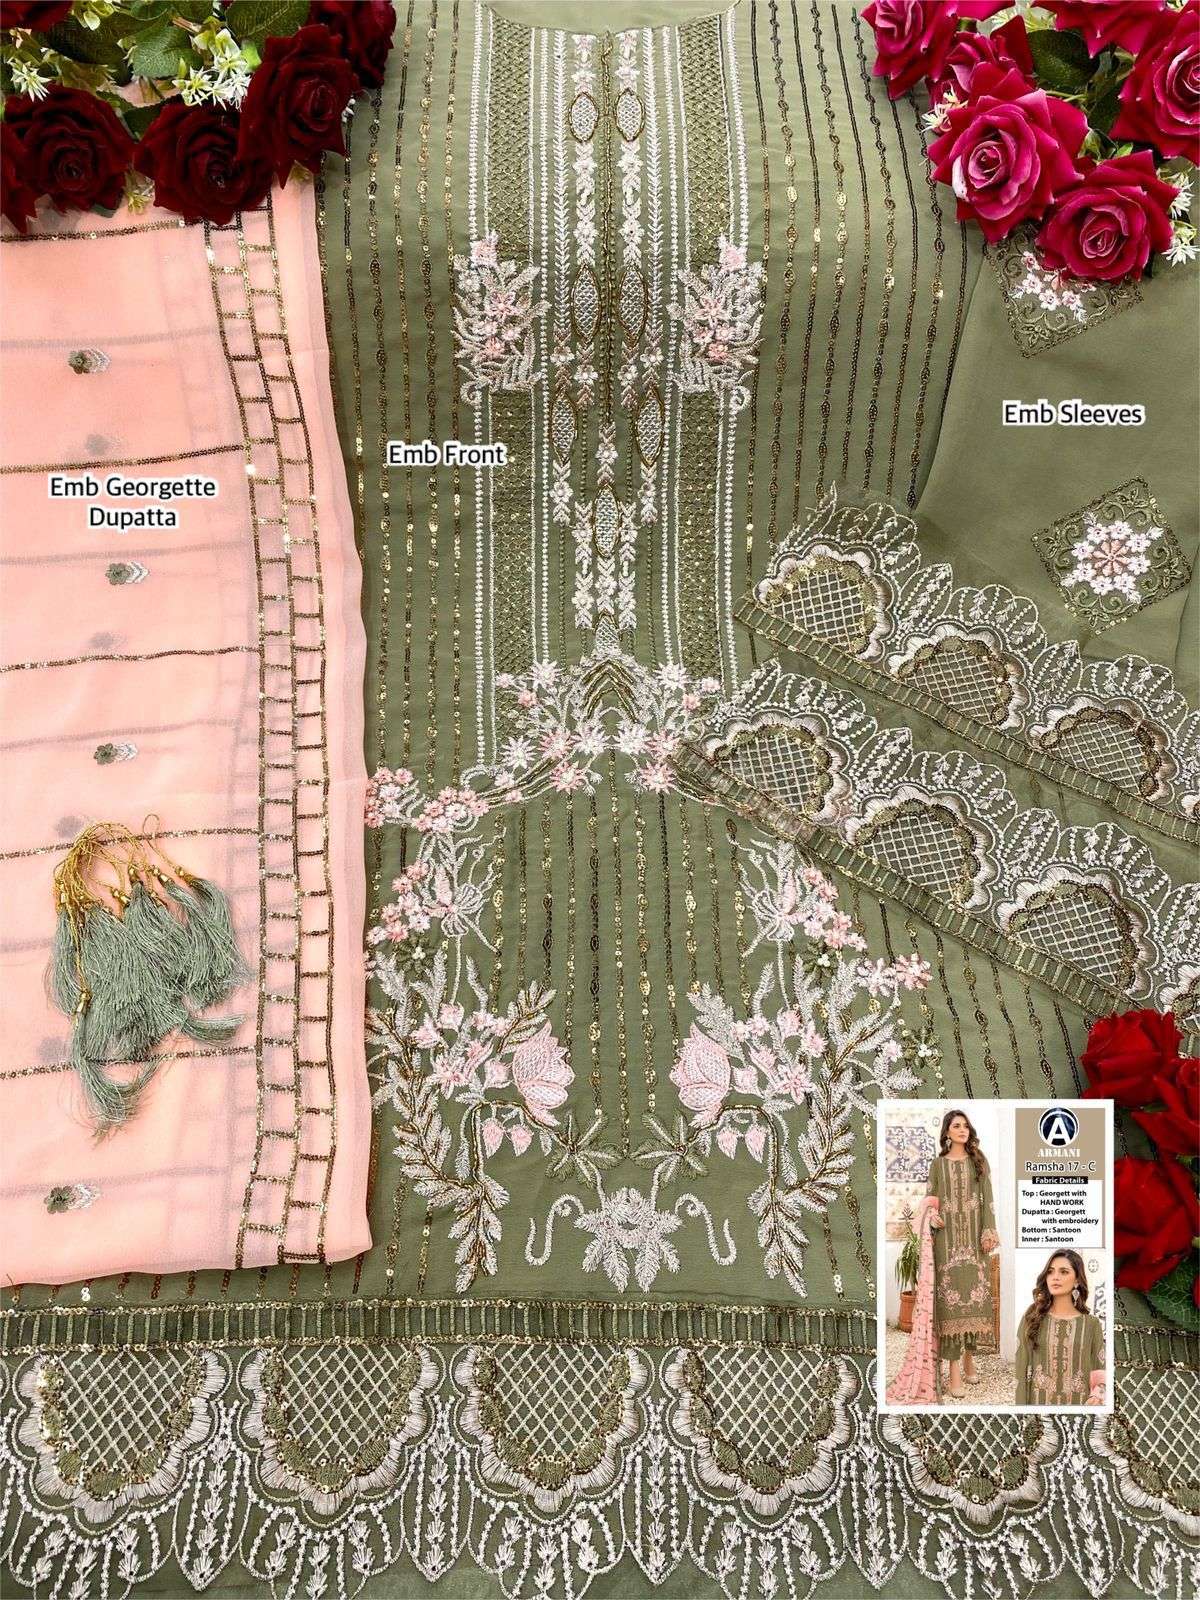 RAMSHA 17 COLOURS BY ARMANI PAKISTANI SUITS BEAUTIFUL FANCY COLORFUL STYLISH PARTY WEAR & OCCASIONAL WEAR GEORGETTE EMBROIDERY DRESSES AT WHOLESALE PRICE